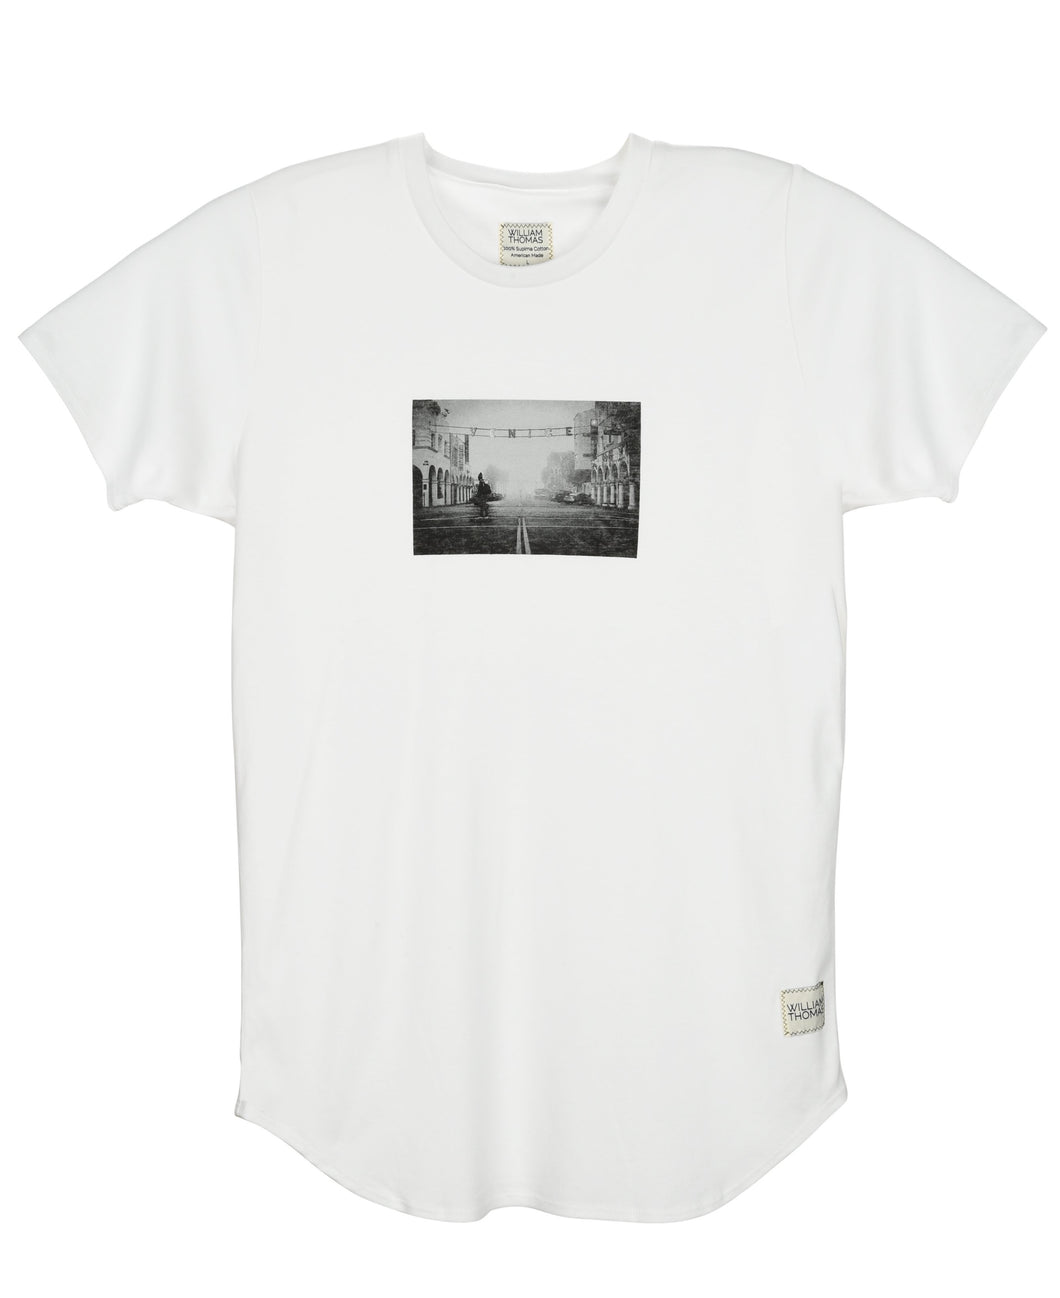 (Sold Out) Supima® Venice Beach, City Series Tee, Ghost White (limited stock)